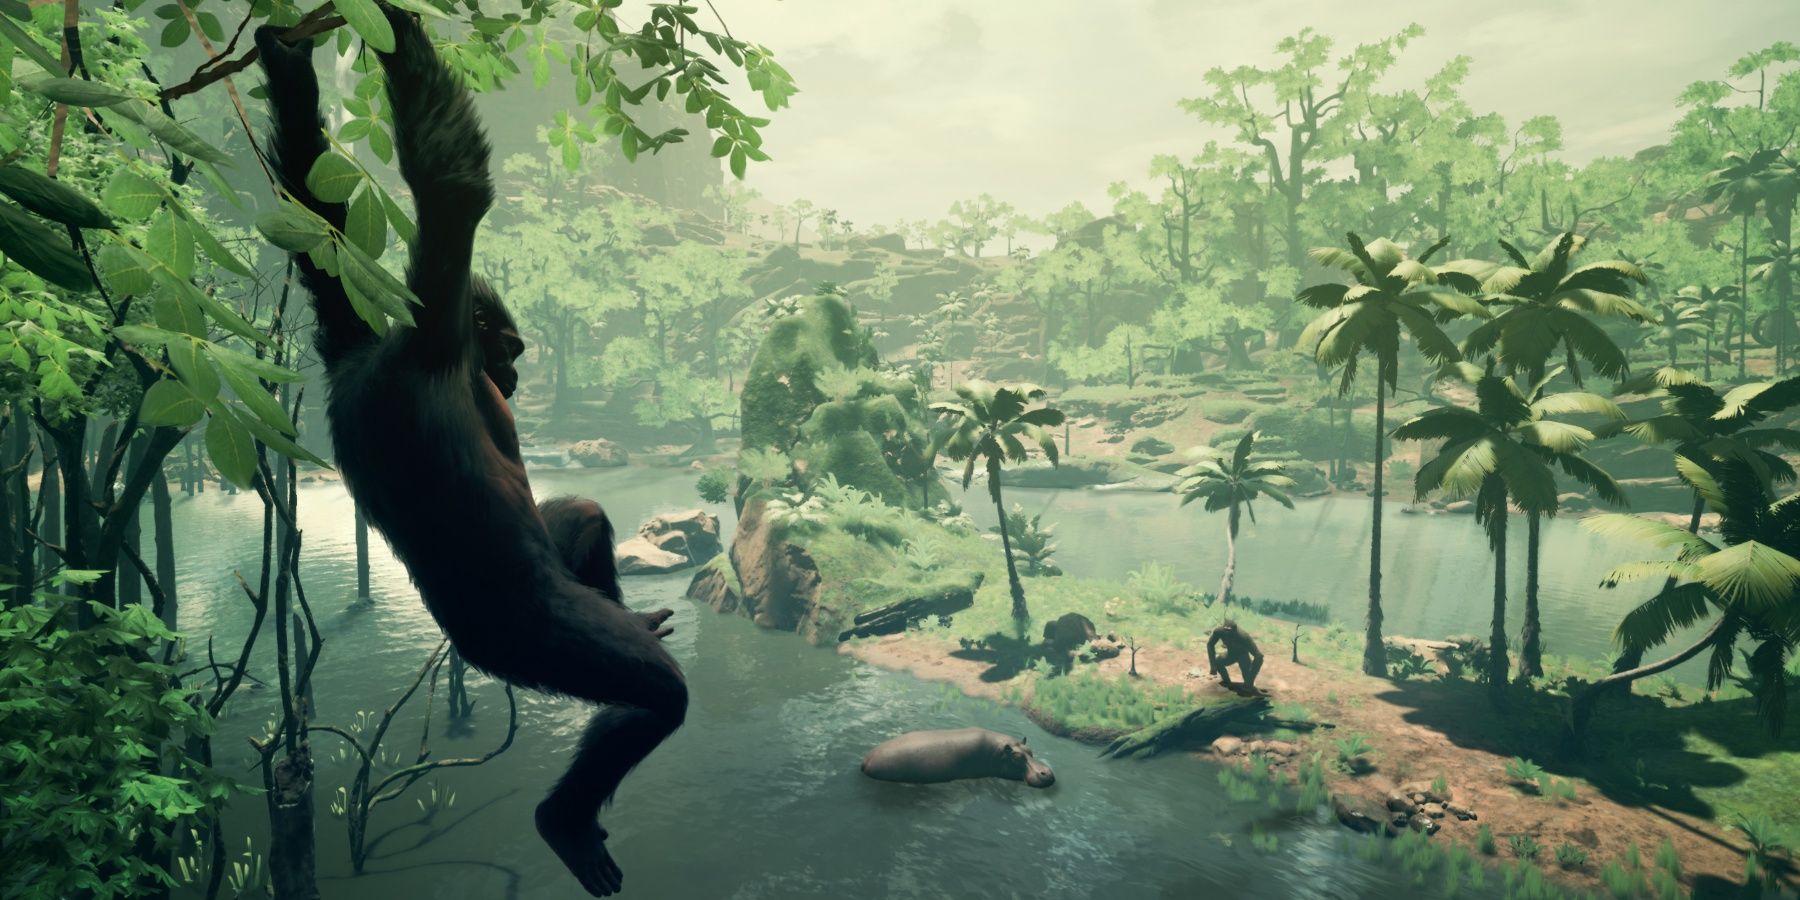 A monkey swinging on a branch over a body of water with a hippo in it